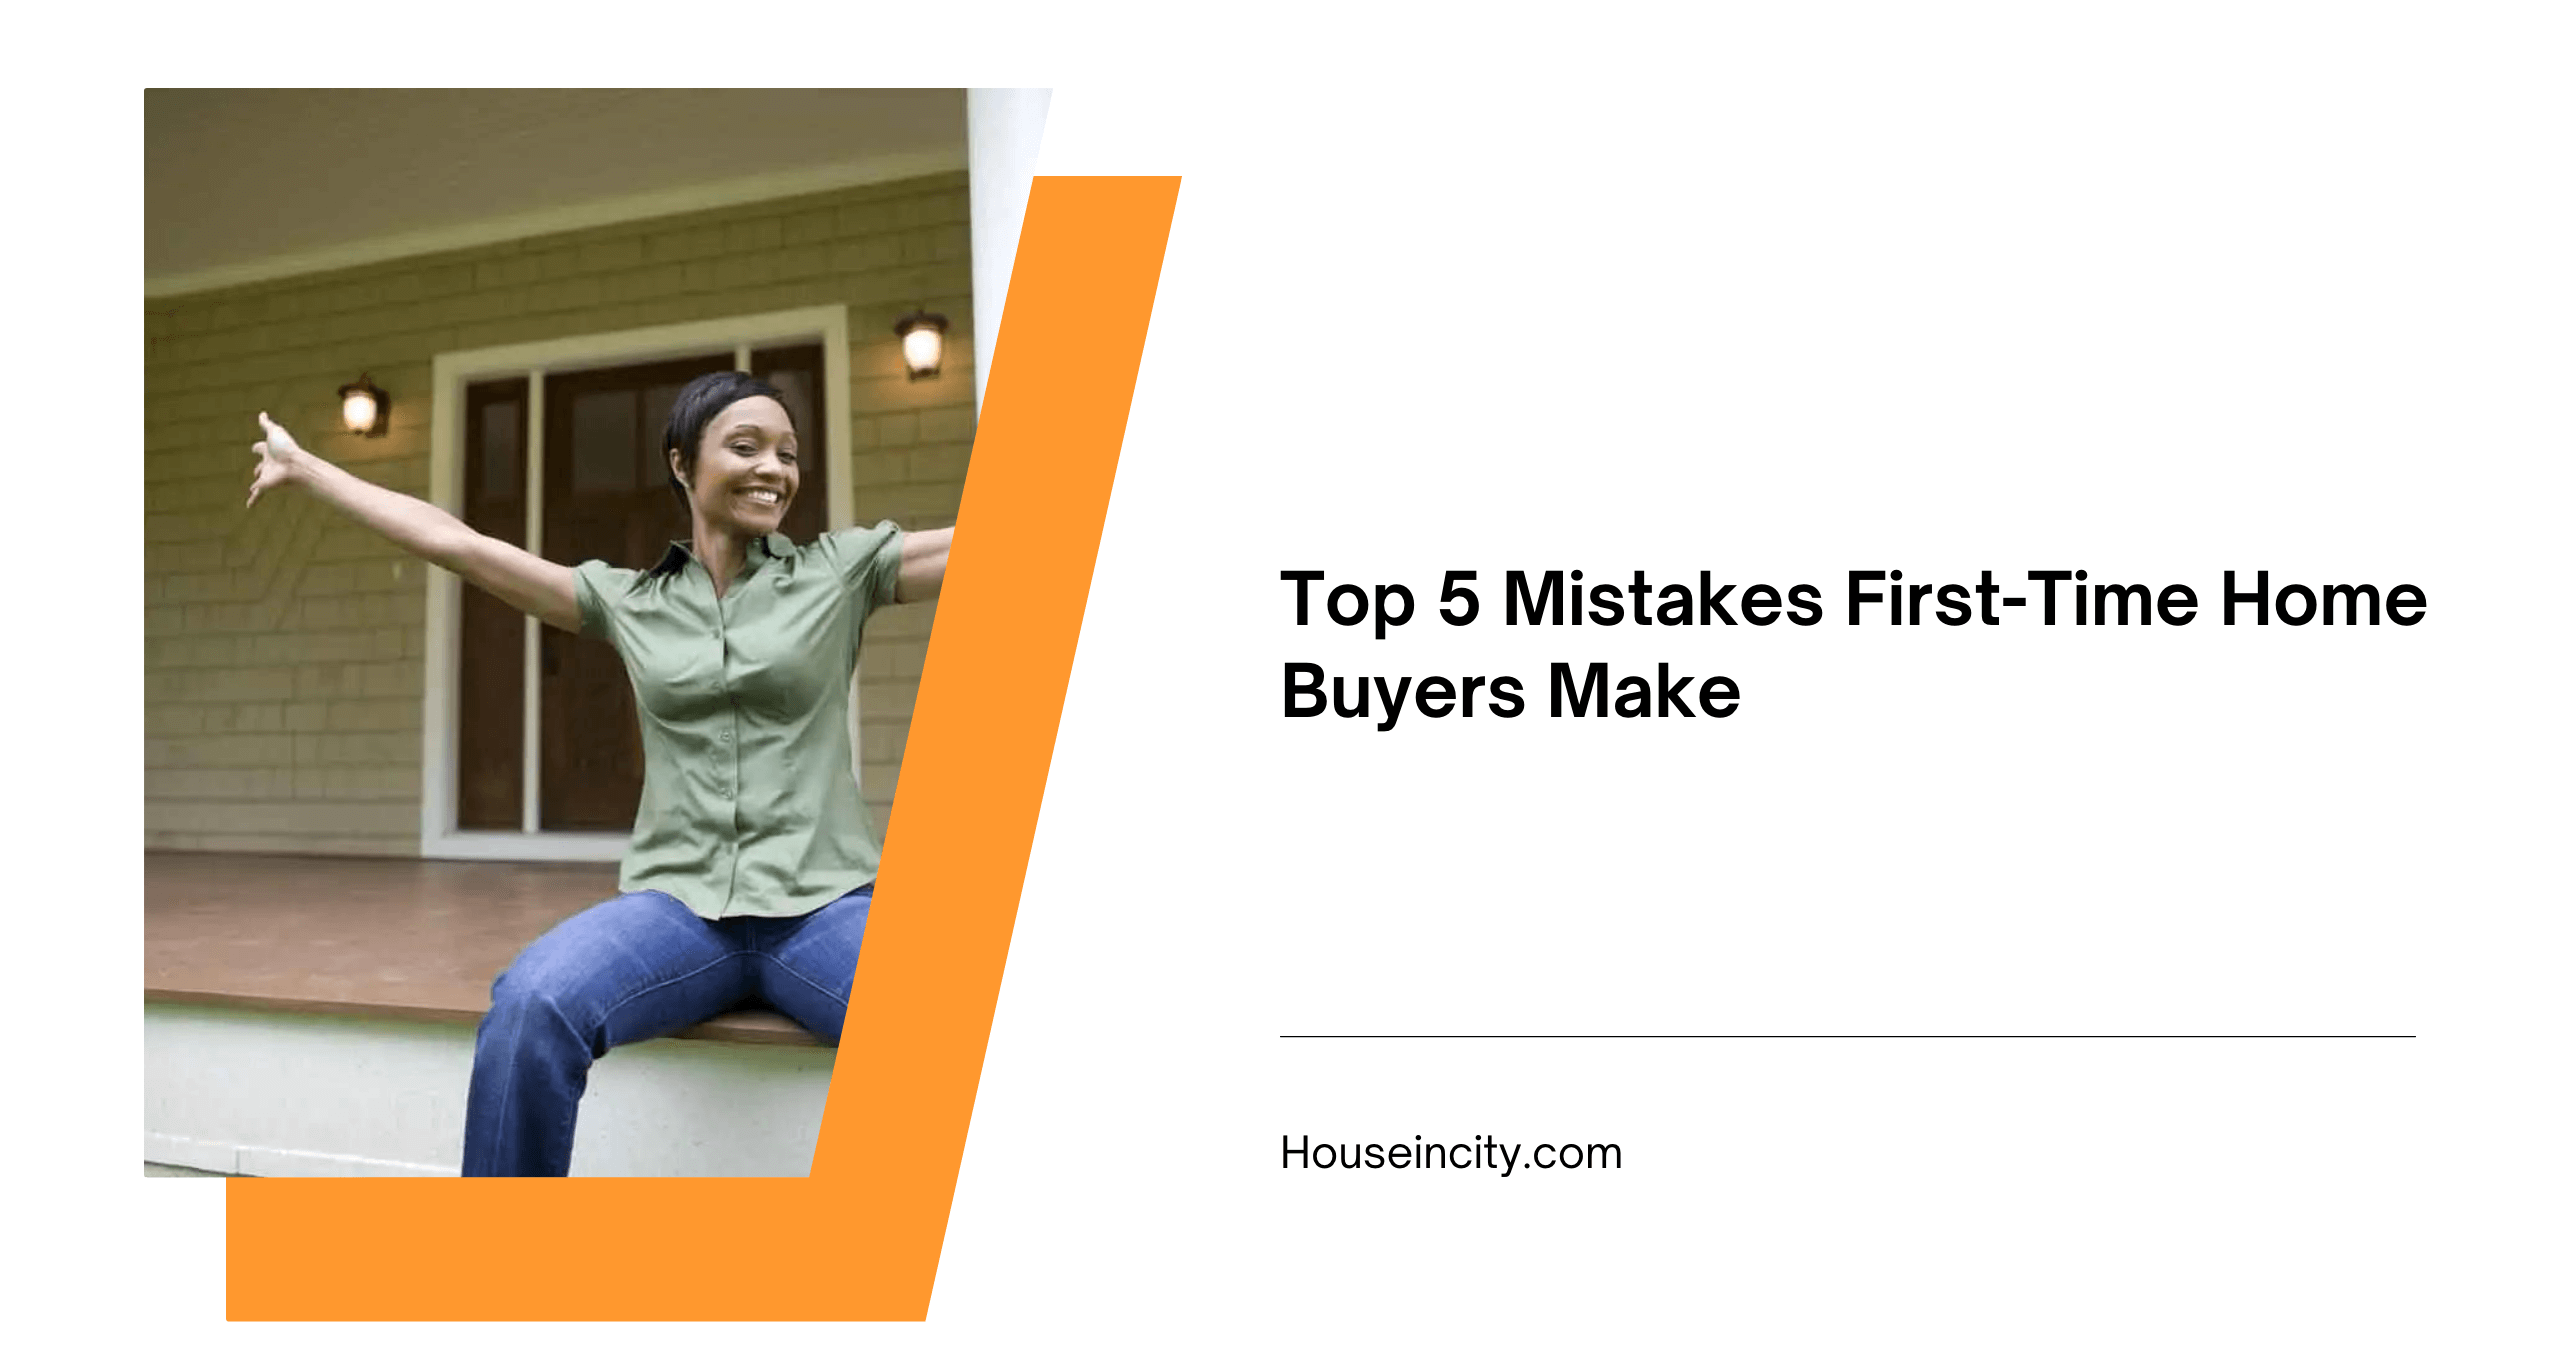 Top 5 Mistakes First-Time Home Buyers Make